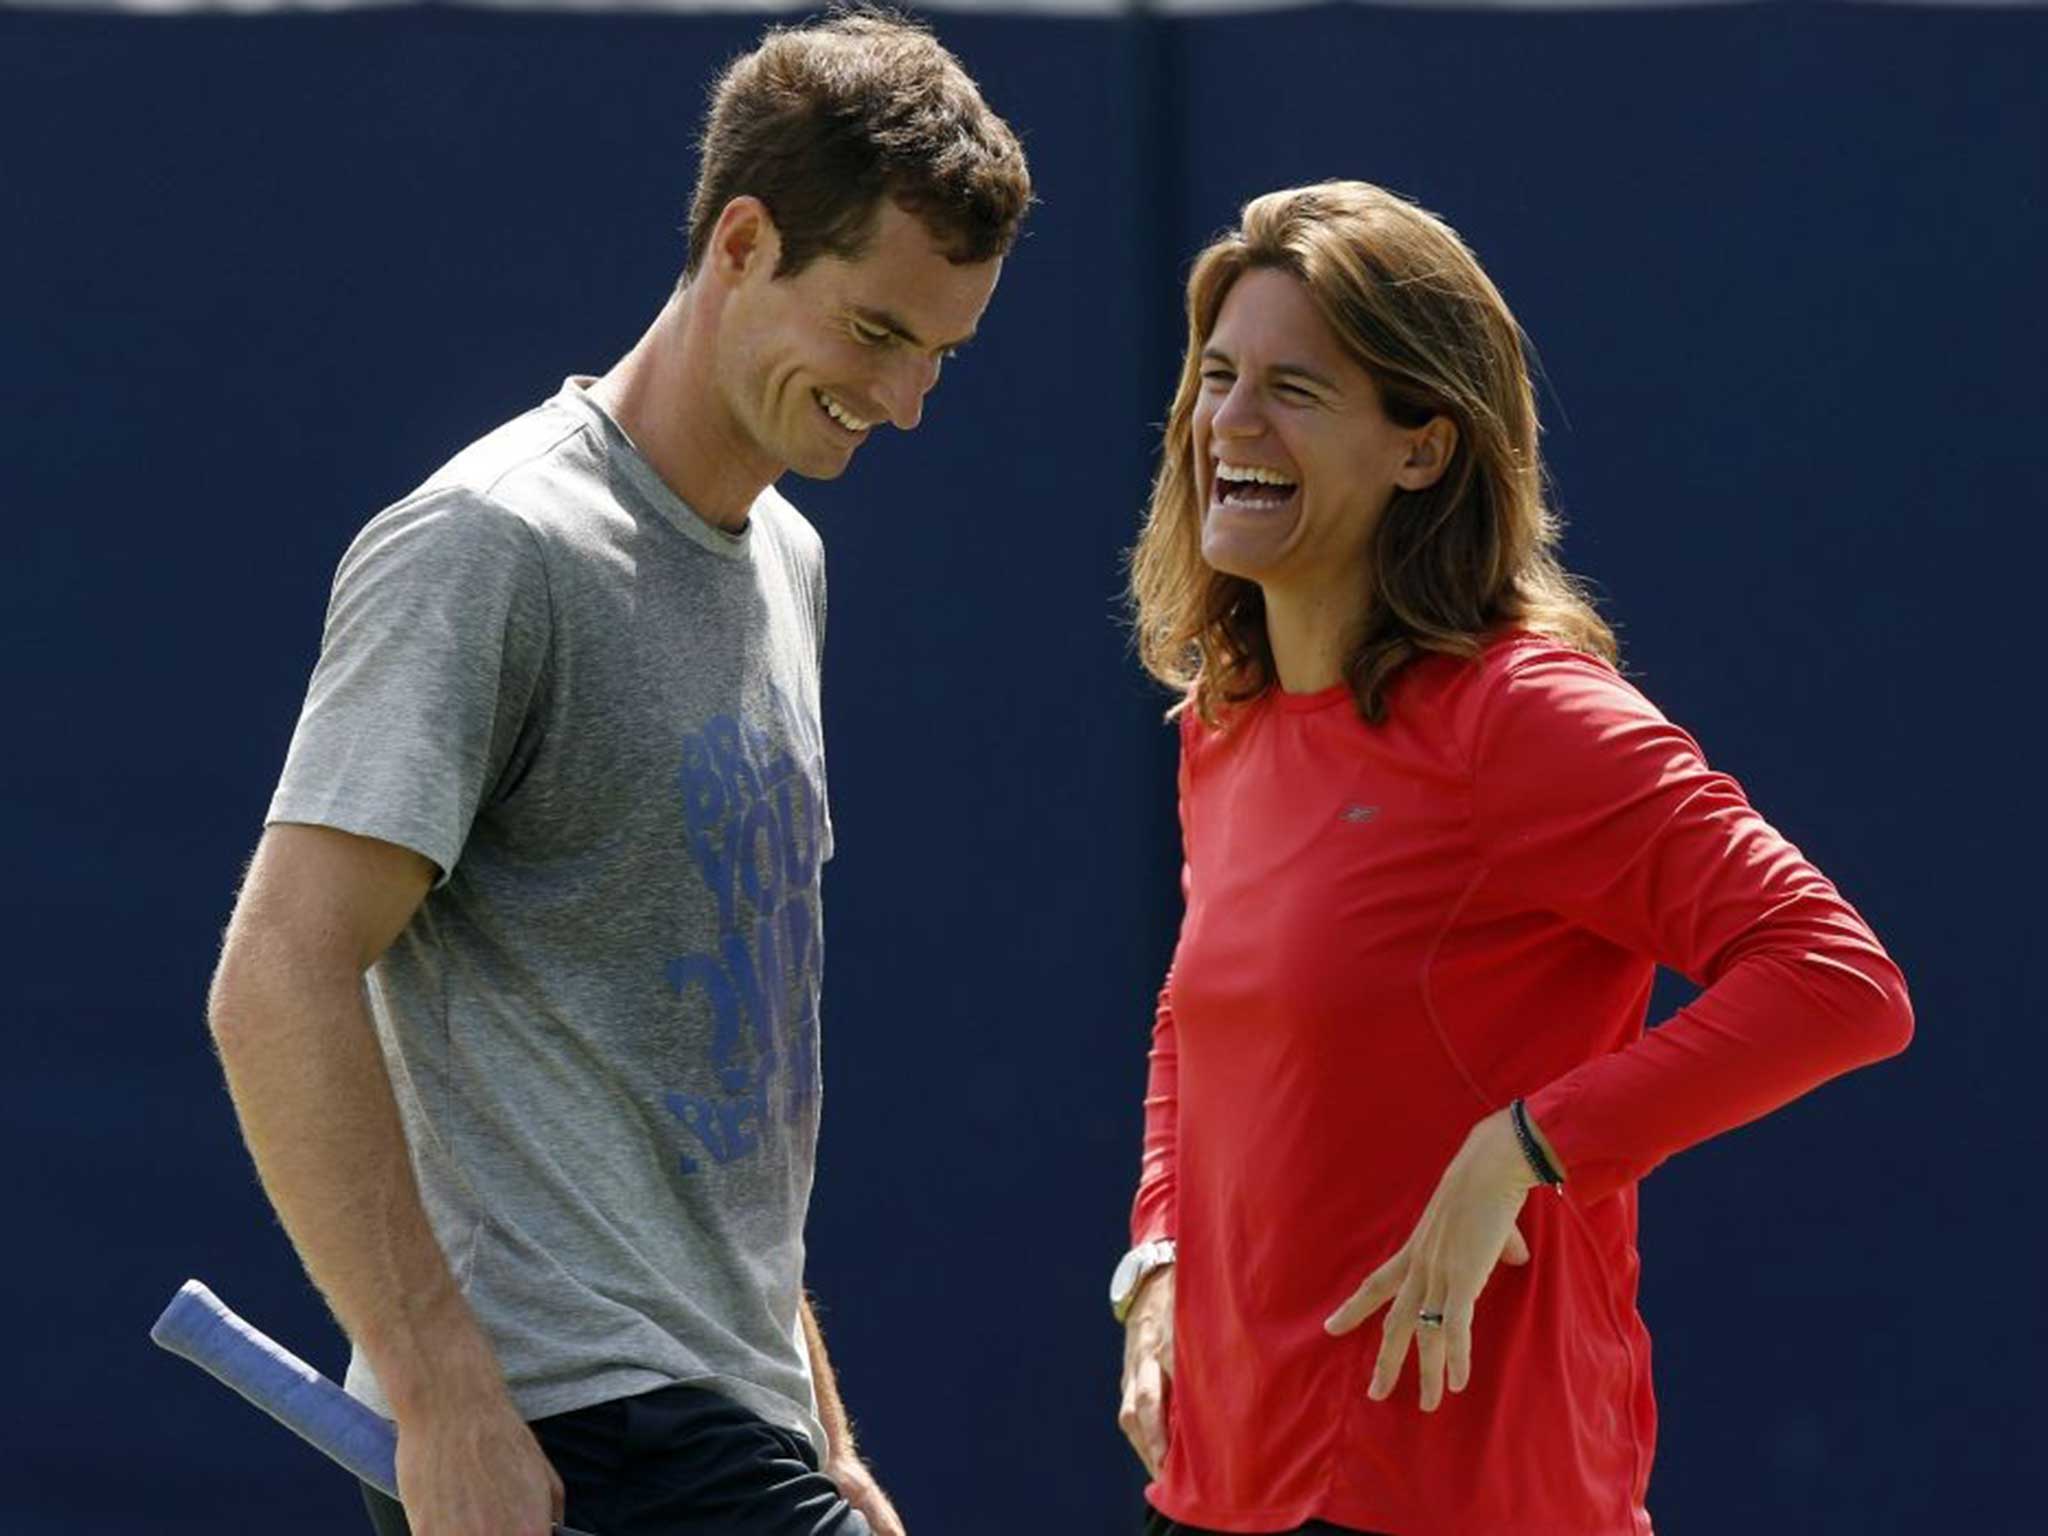 Happy couple: Andy Murray and Amélie Mauresmo share a joke during training, highlighting the relaxed nature of their new relationship